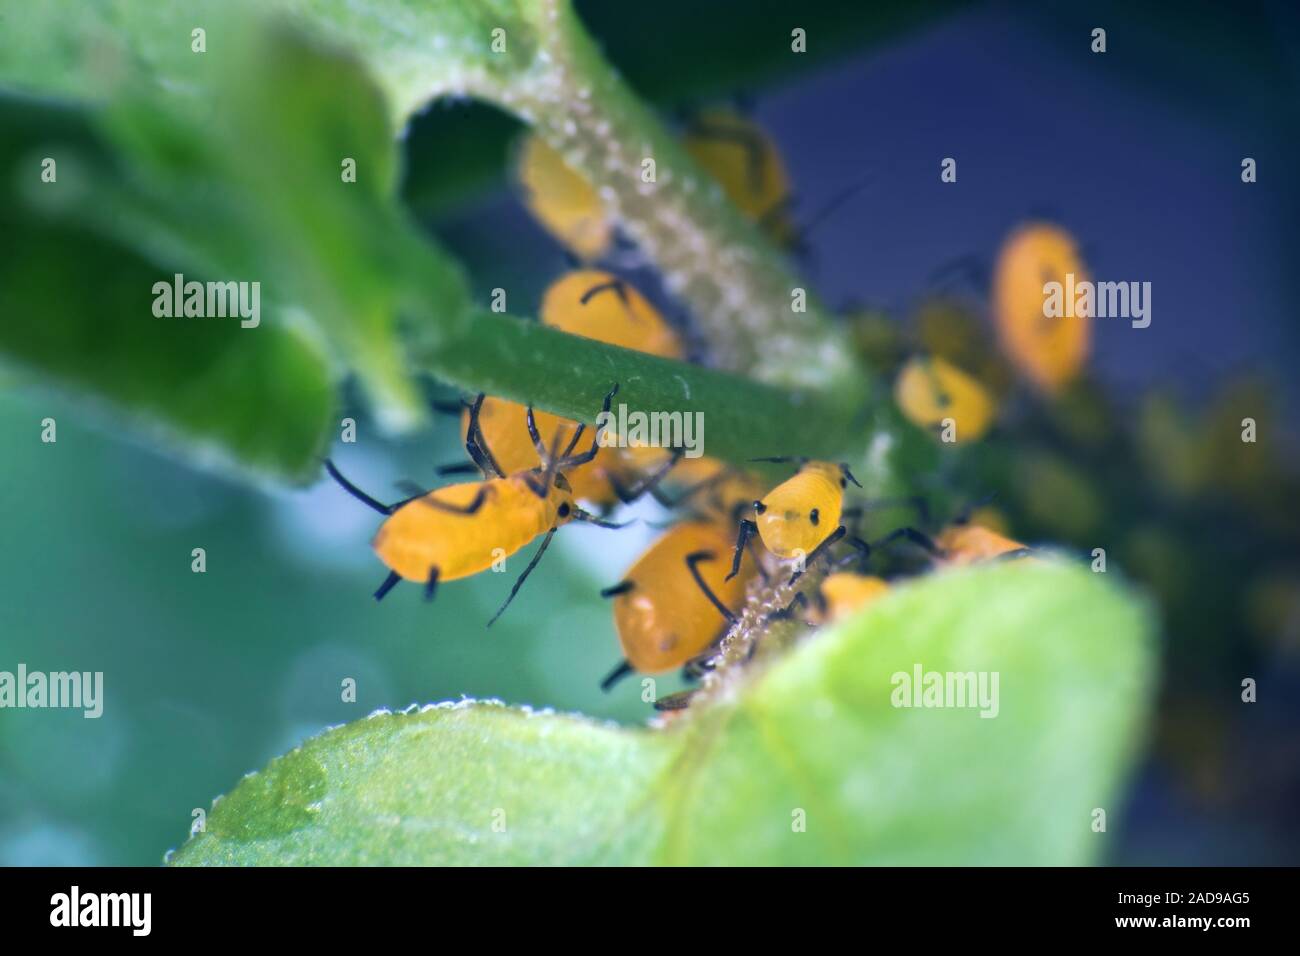 Aphids like green men rushes to the plant with an army Stock Photo